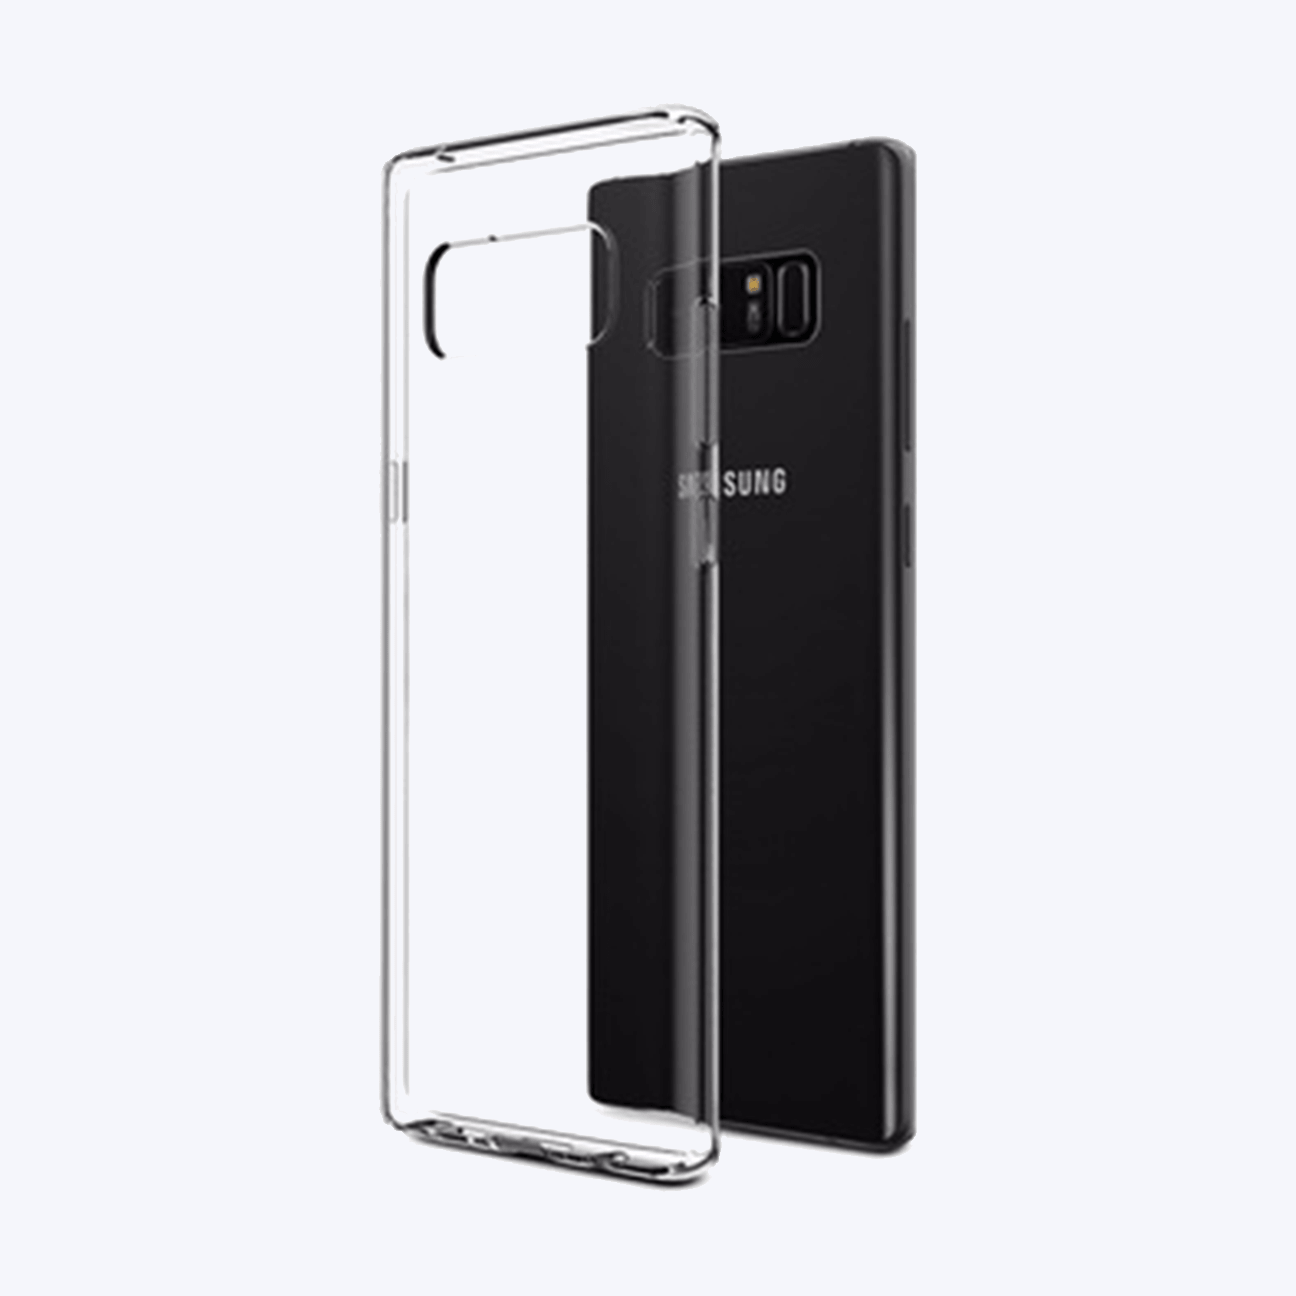 Samsung Galaxy Note 8 Transparent Back Cover